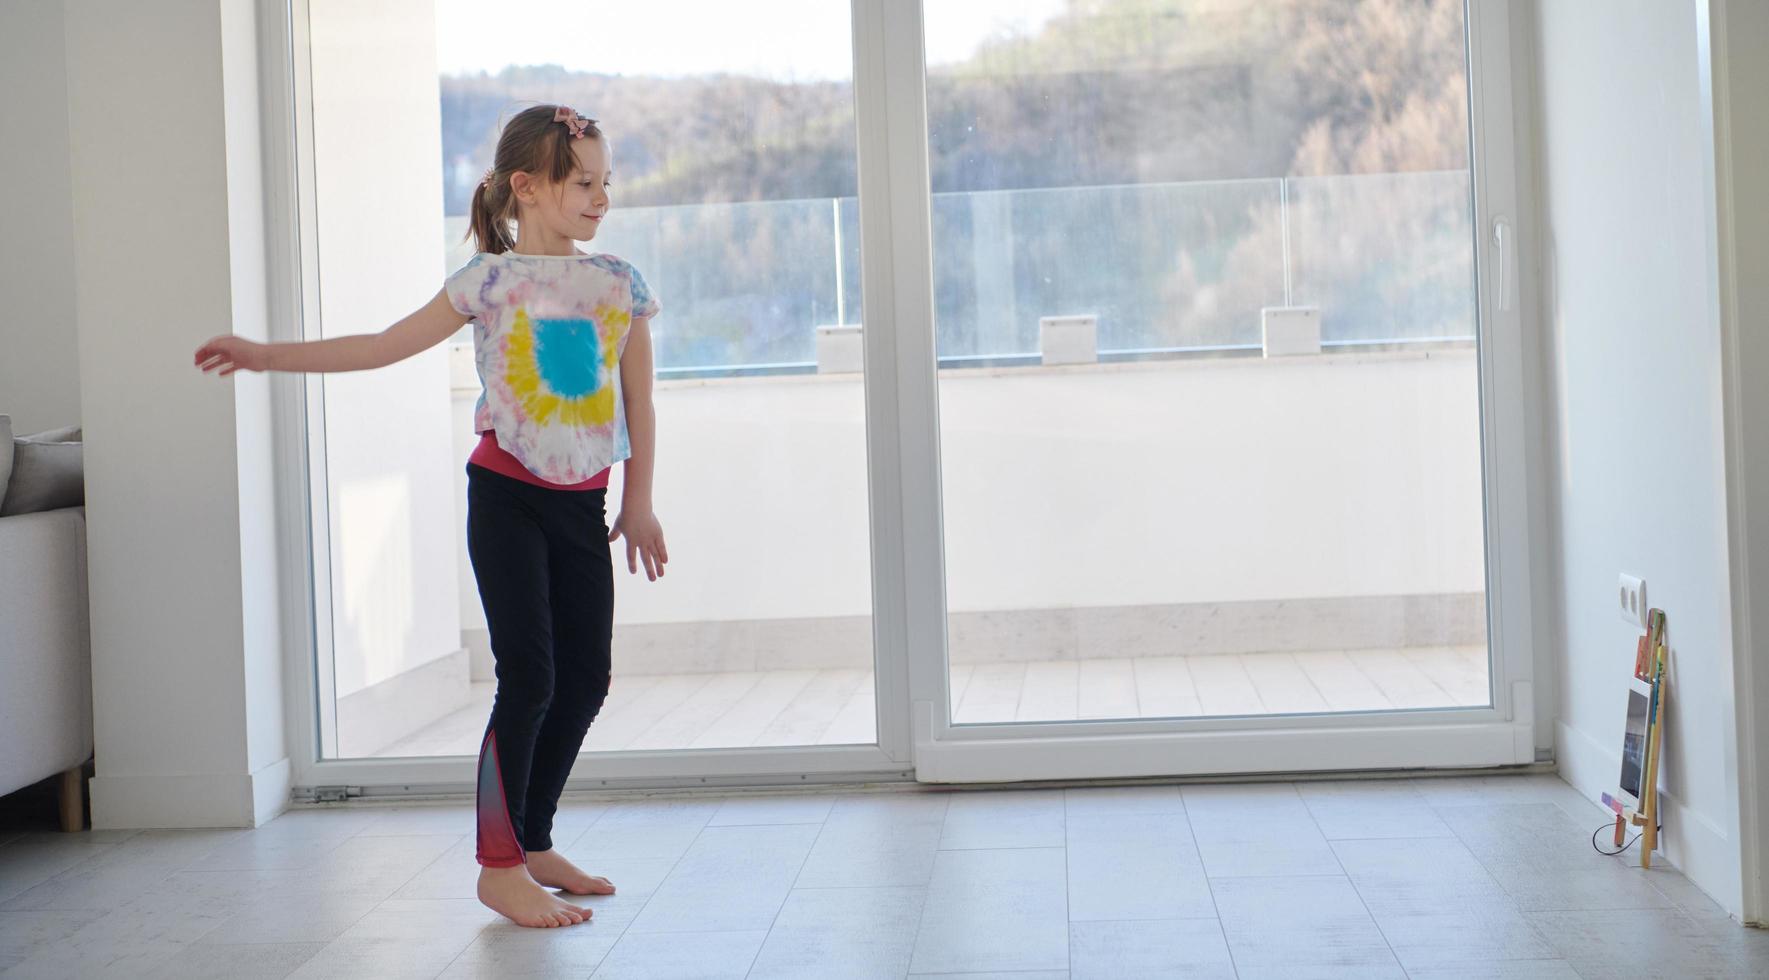 girl online education ballet class at home photo